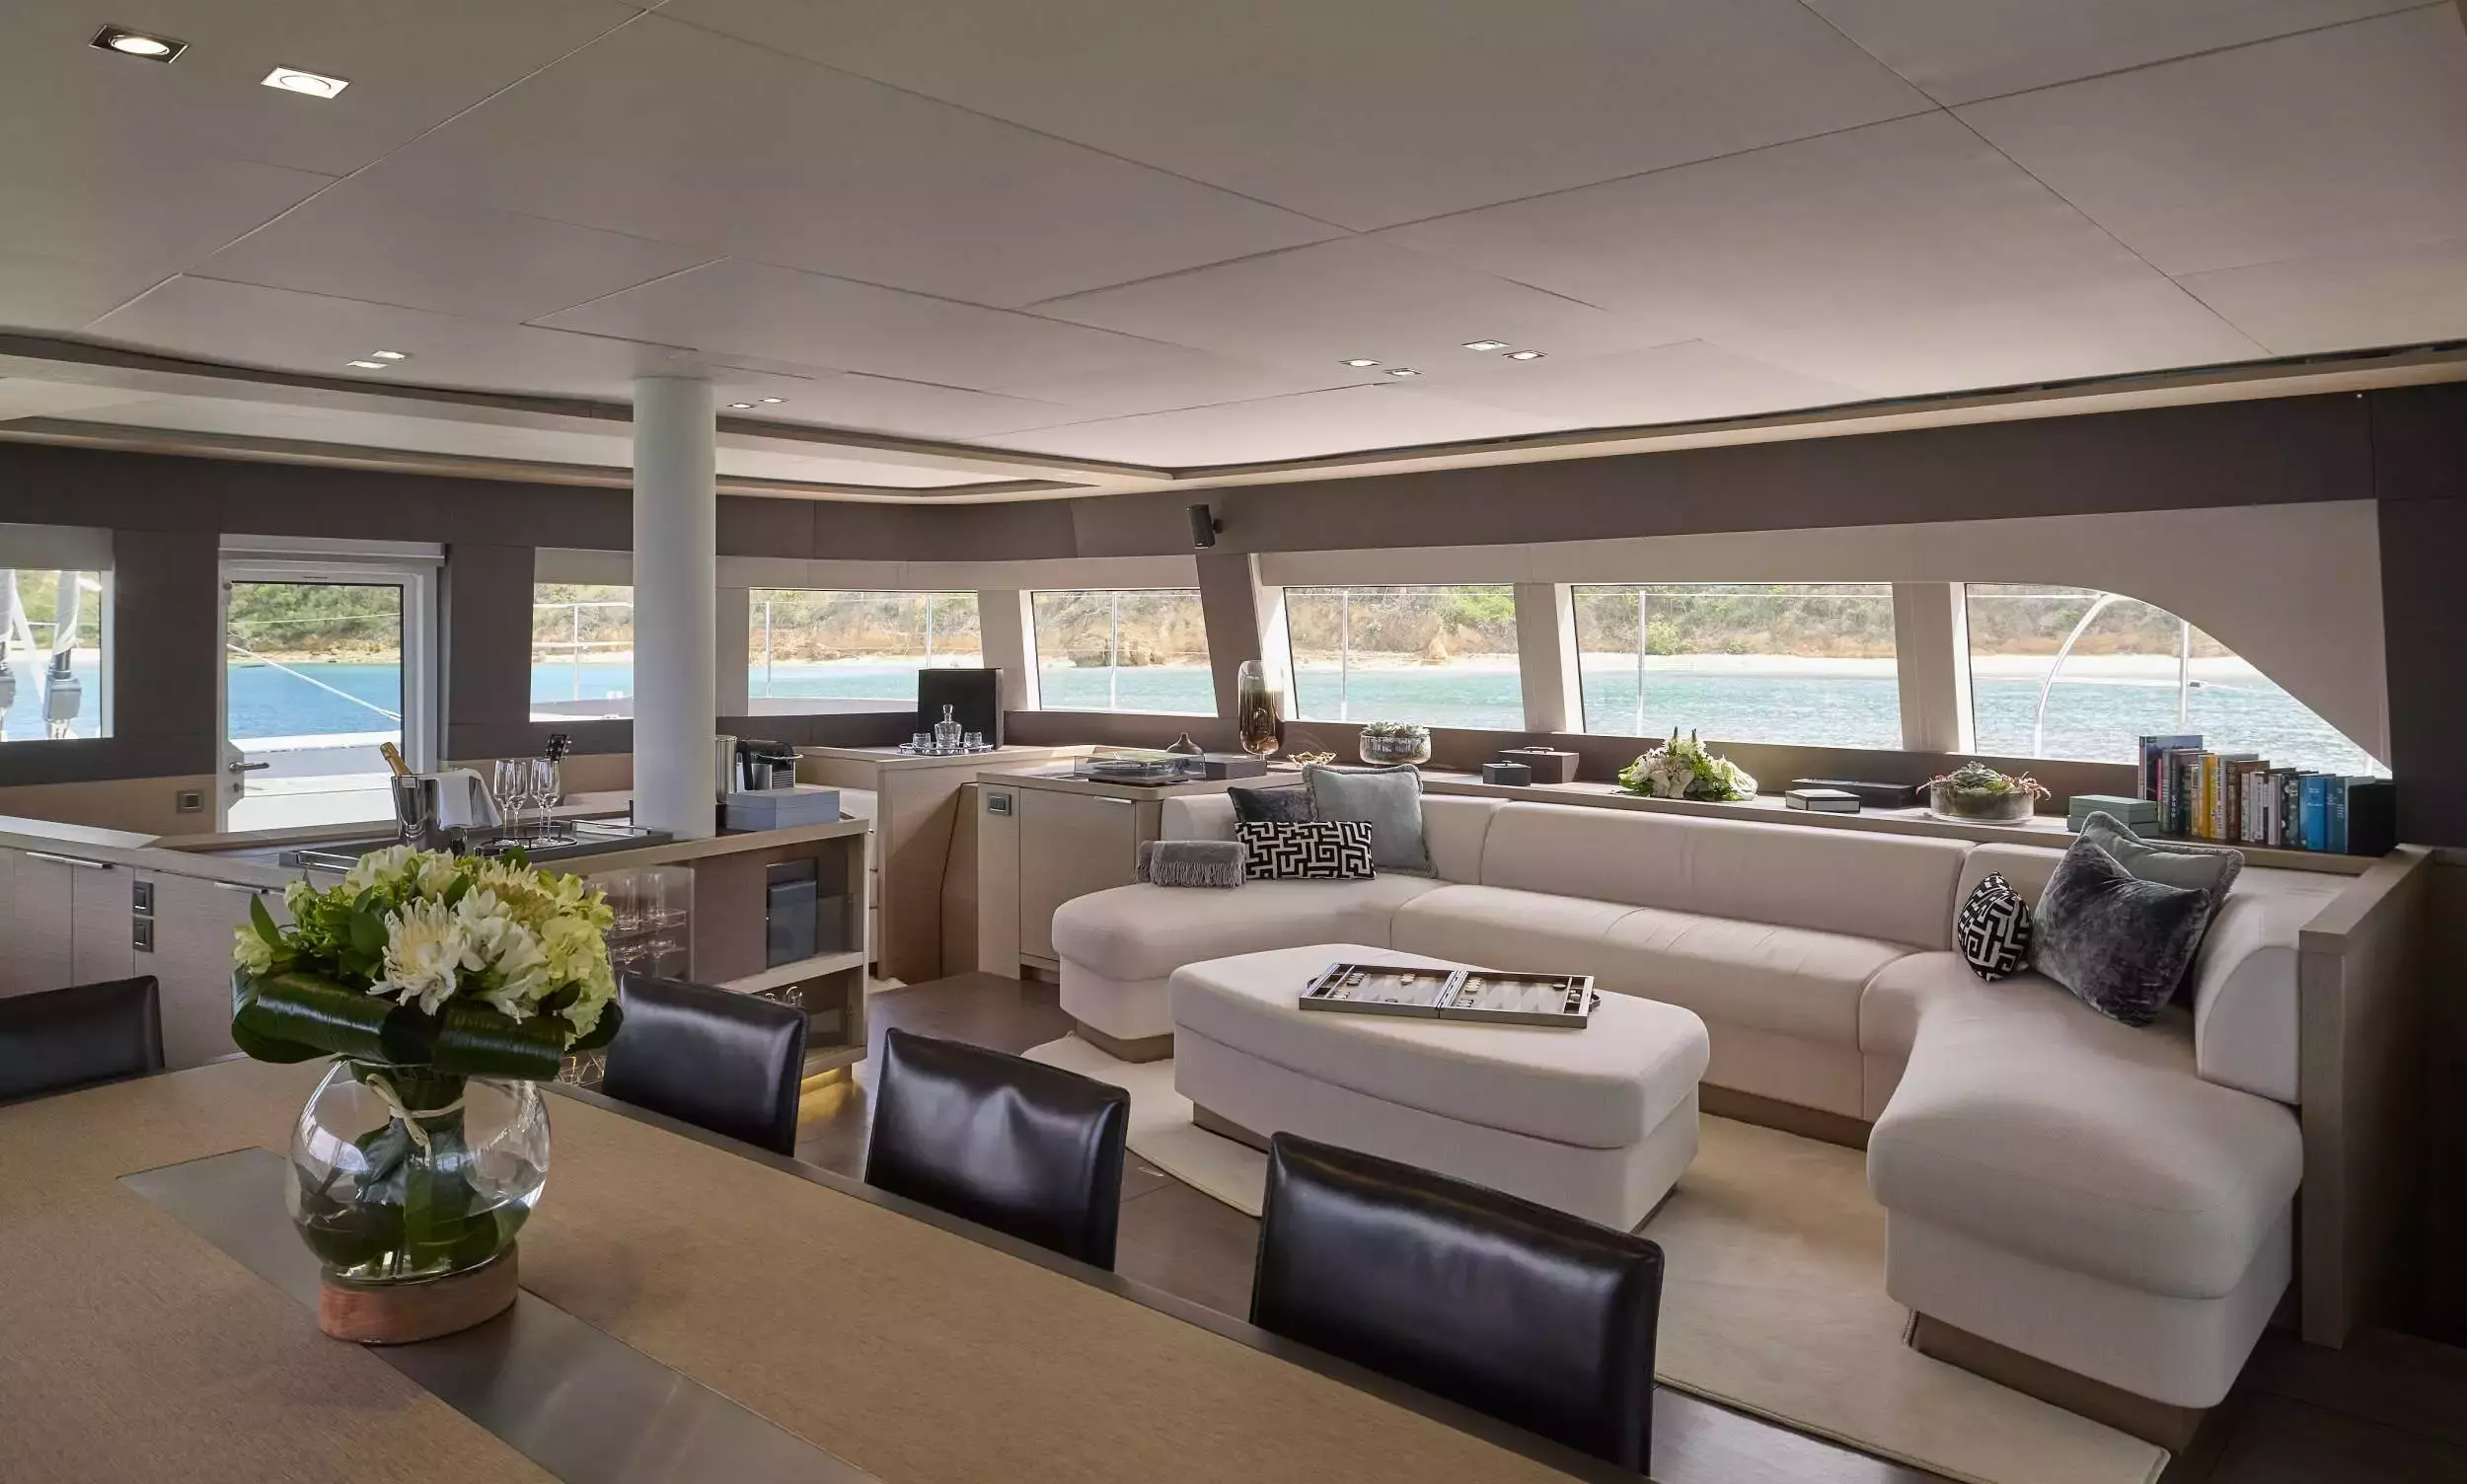 La Gatta by CNB Bordeaux - Special Offer for a private Luxury Catamaran Charter in St Thomas with a crew